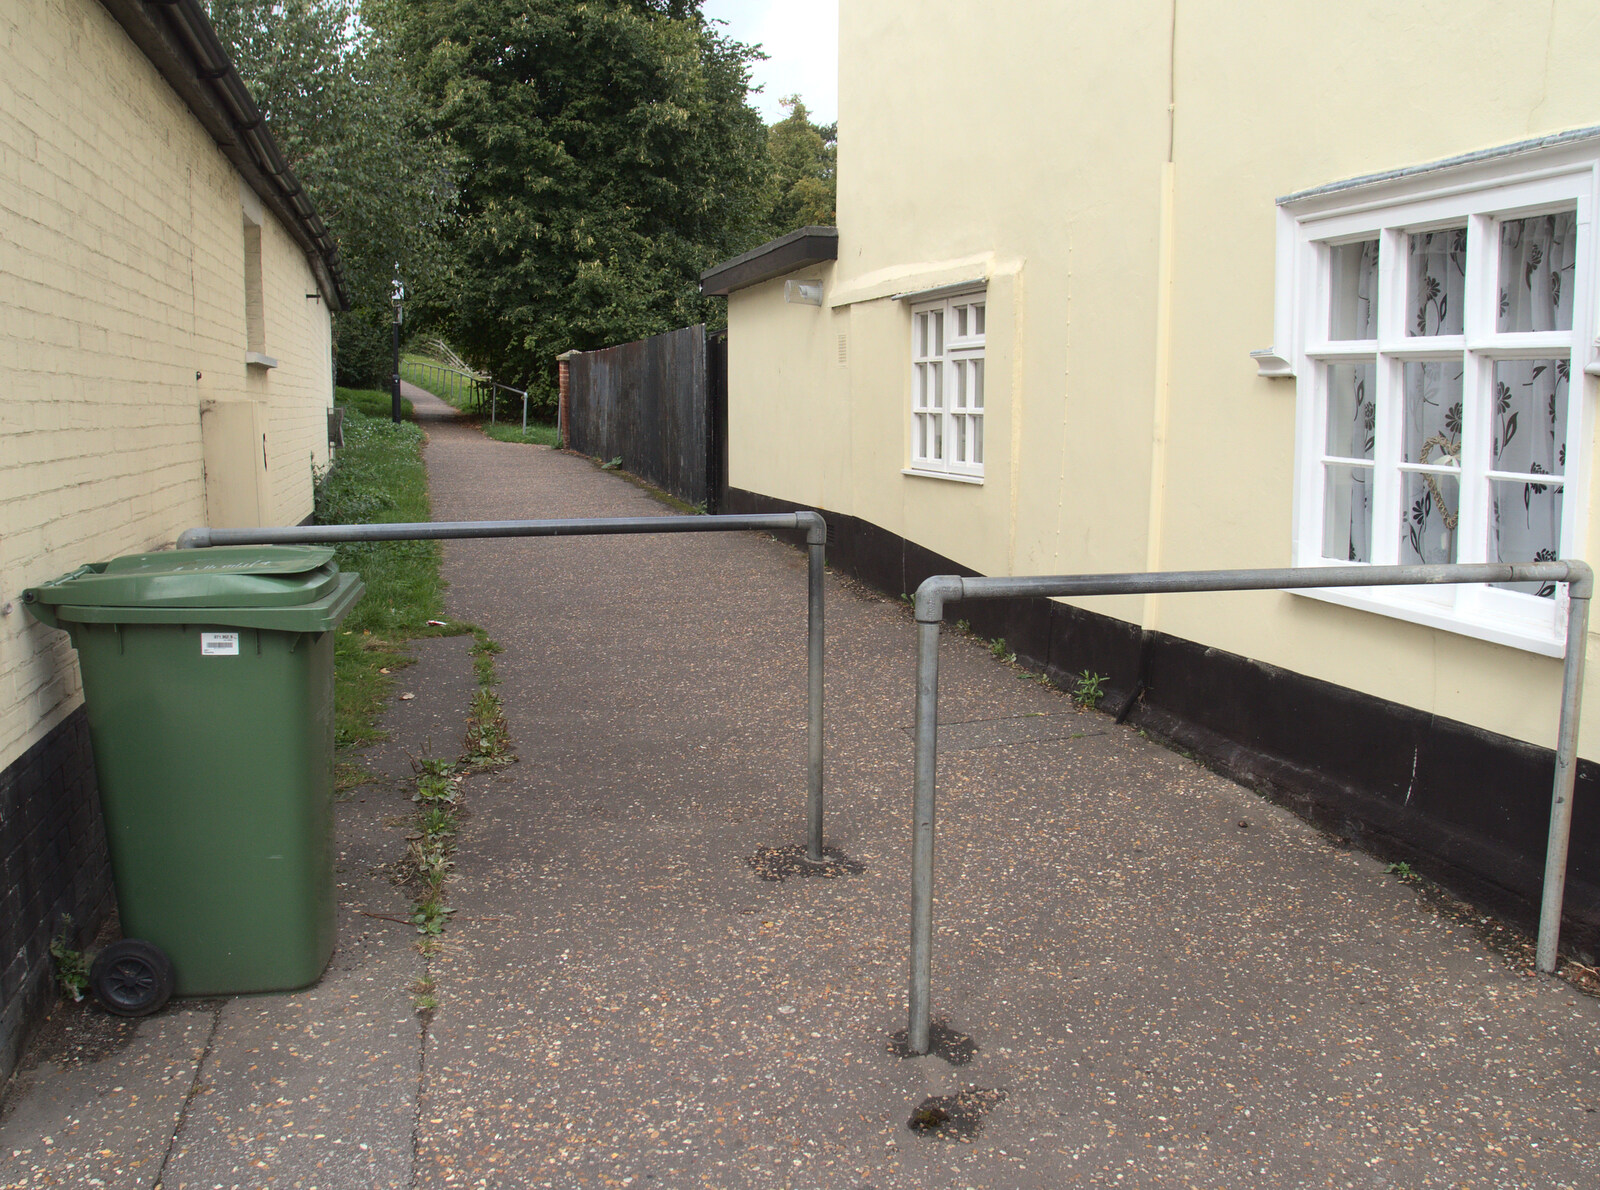 The footpath up from Mount Street in Diss from The Oaksmere, and the Gislingham Flower Festival, Suffolk - 24th August 2014